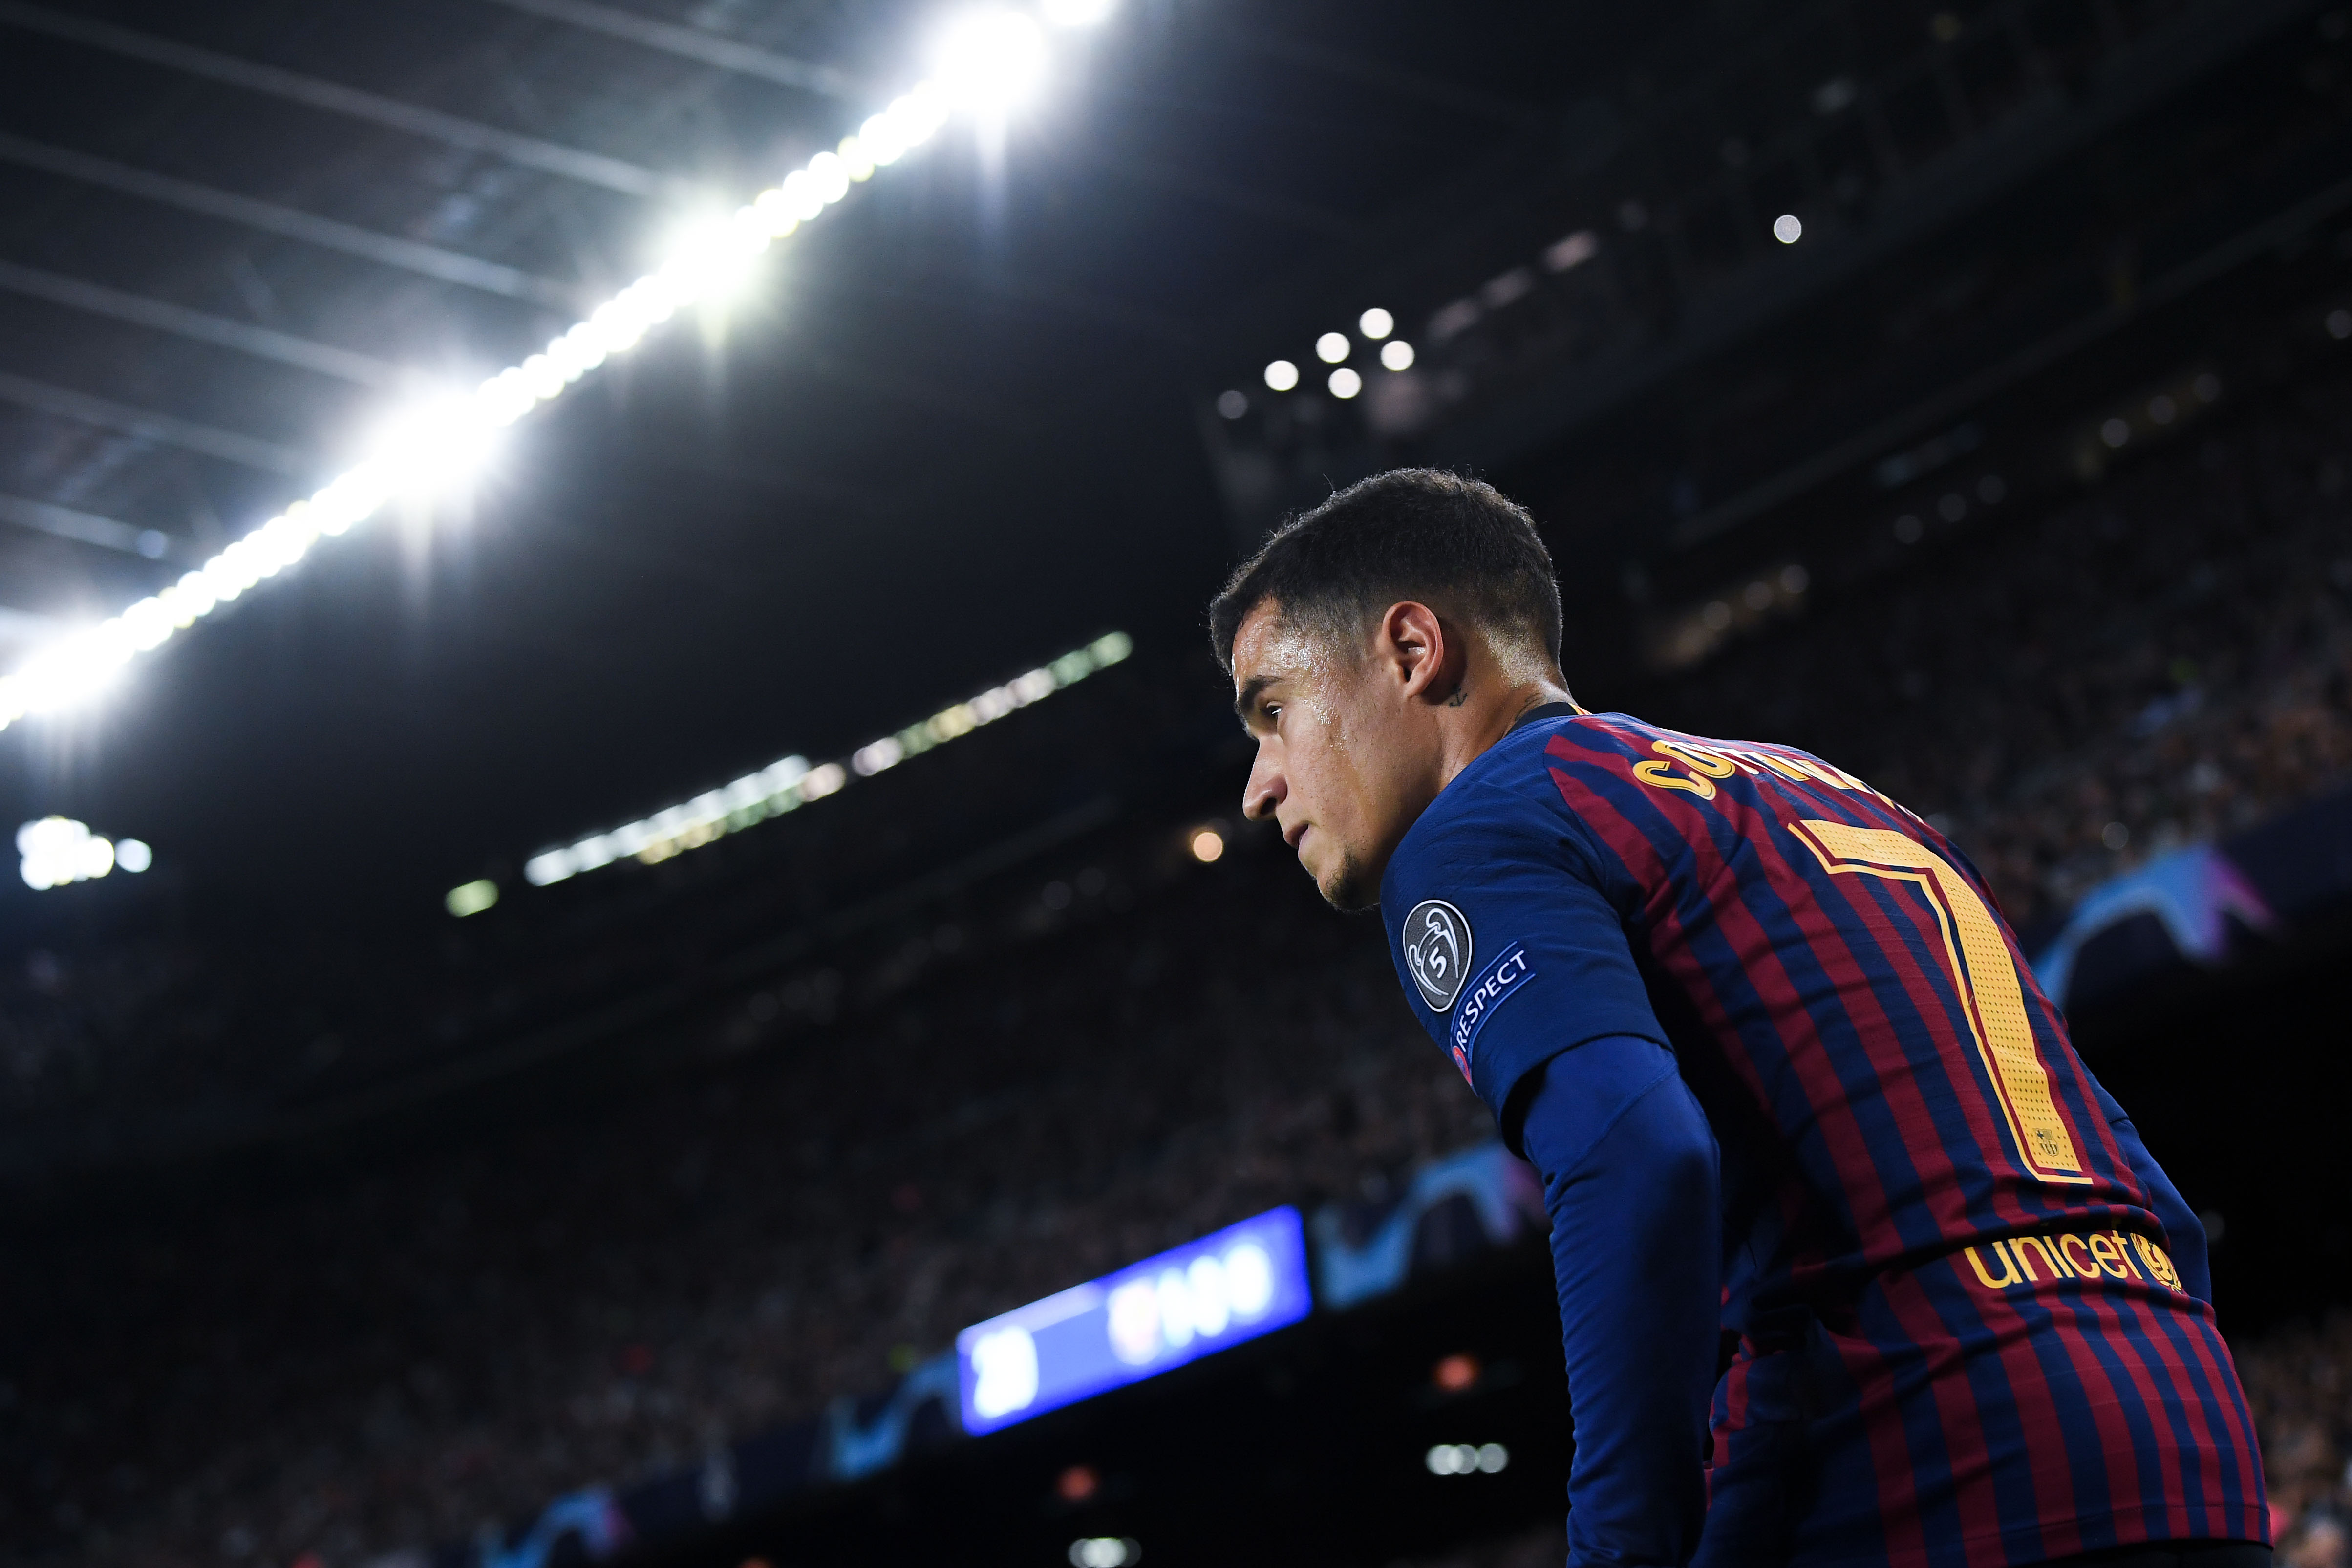 BARCELONA, SPAIN - OCTOBER 24:  Philippe Coutinho of FC Barcelona looks on during the Group B match of the UEFA Champions League between FC Barcelona and FC Internazionale at Camp Nou on October 24, 2018 in Barcelona, Spain.  (Photo by David Ramos/Getty Images)